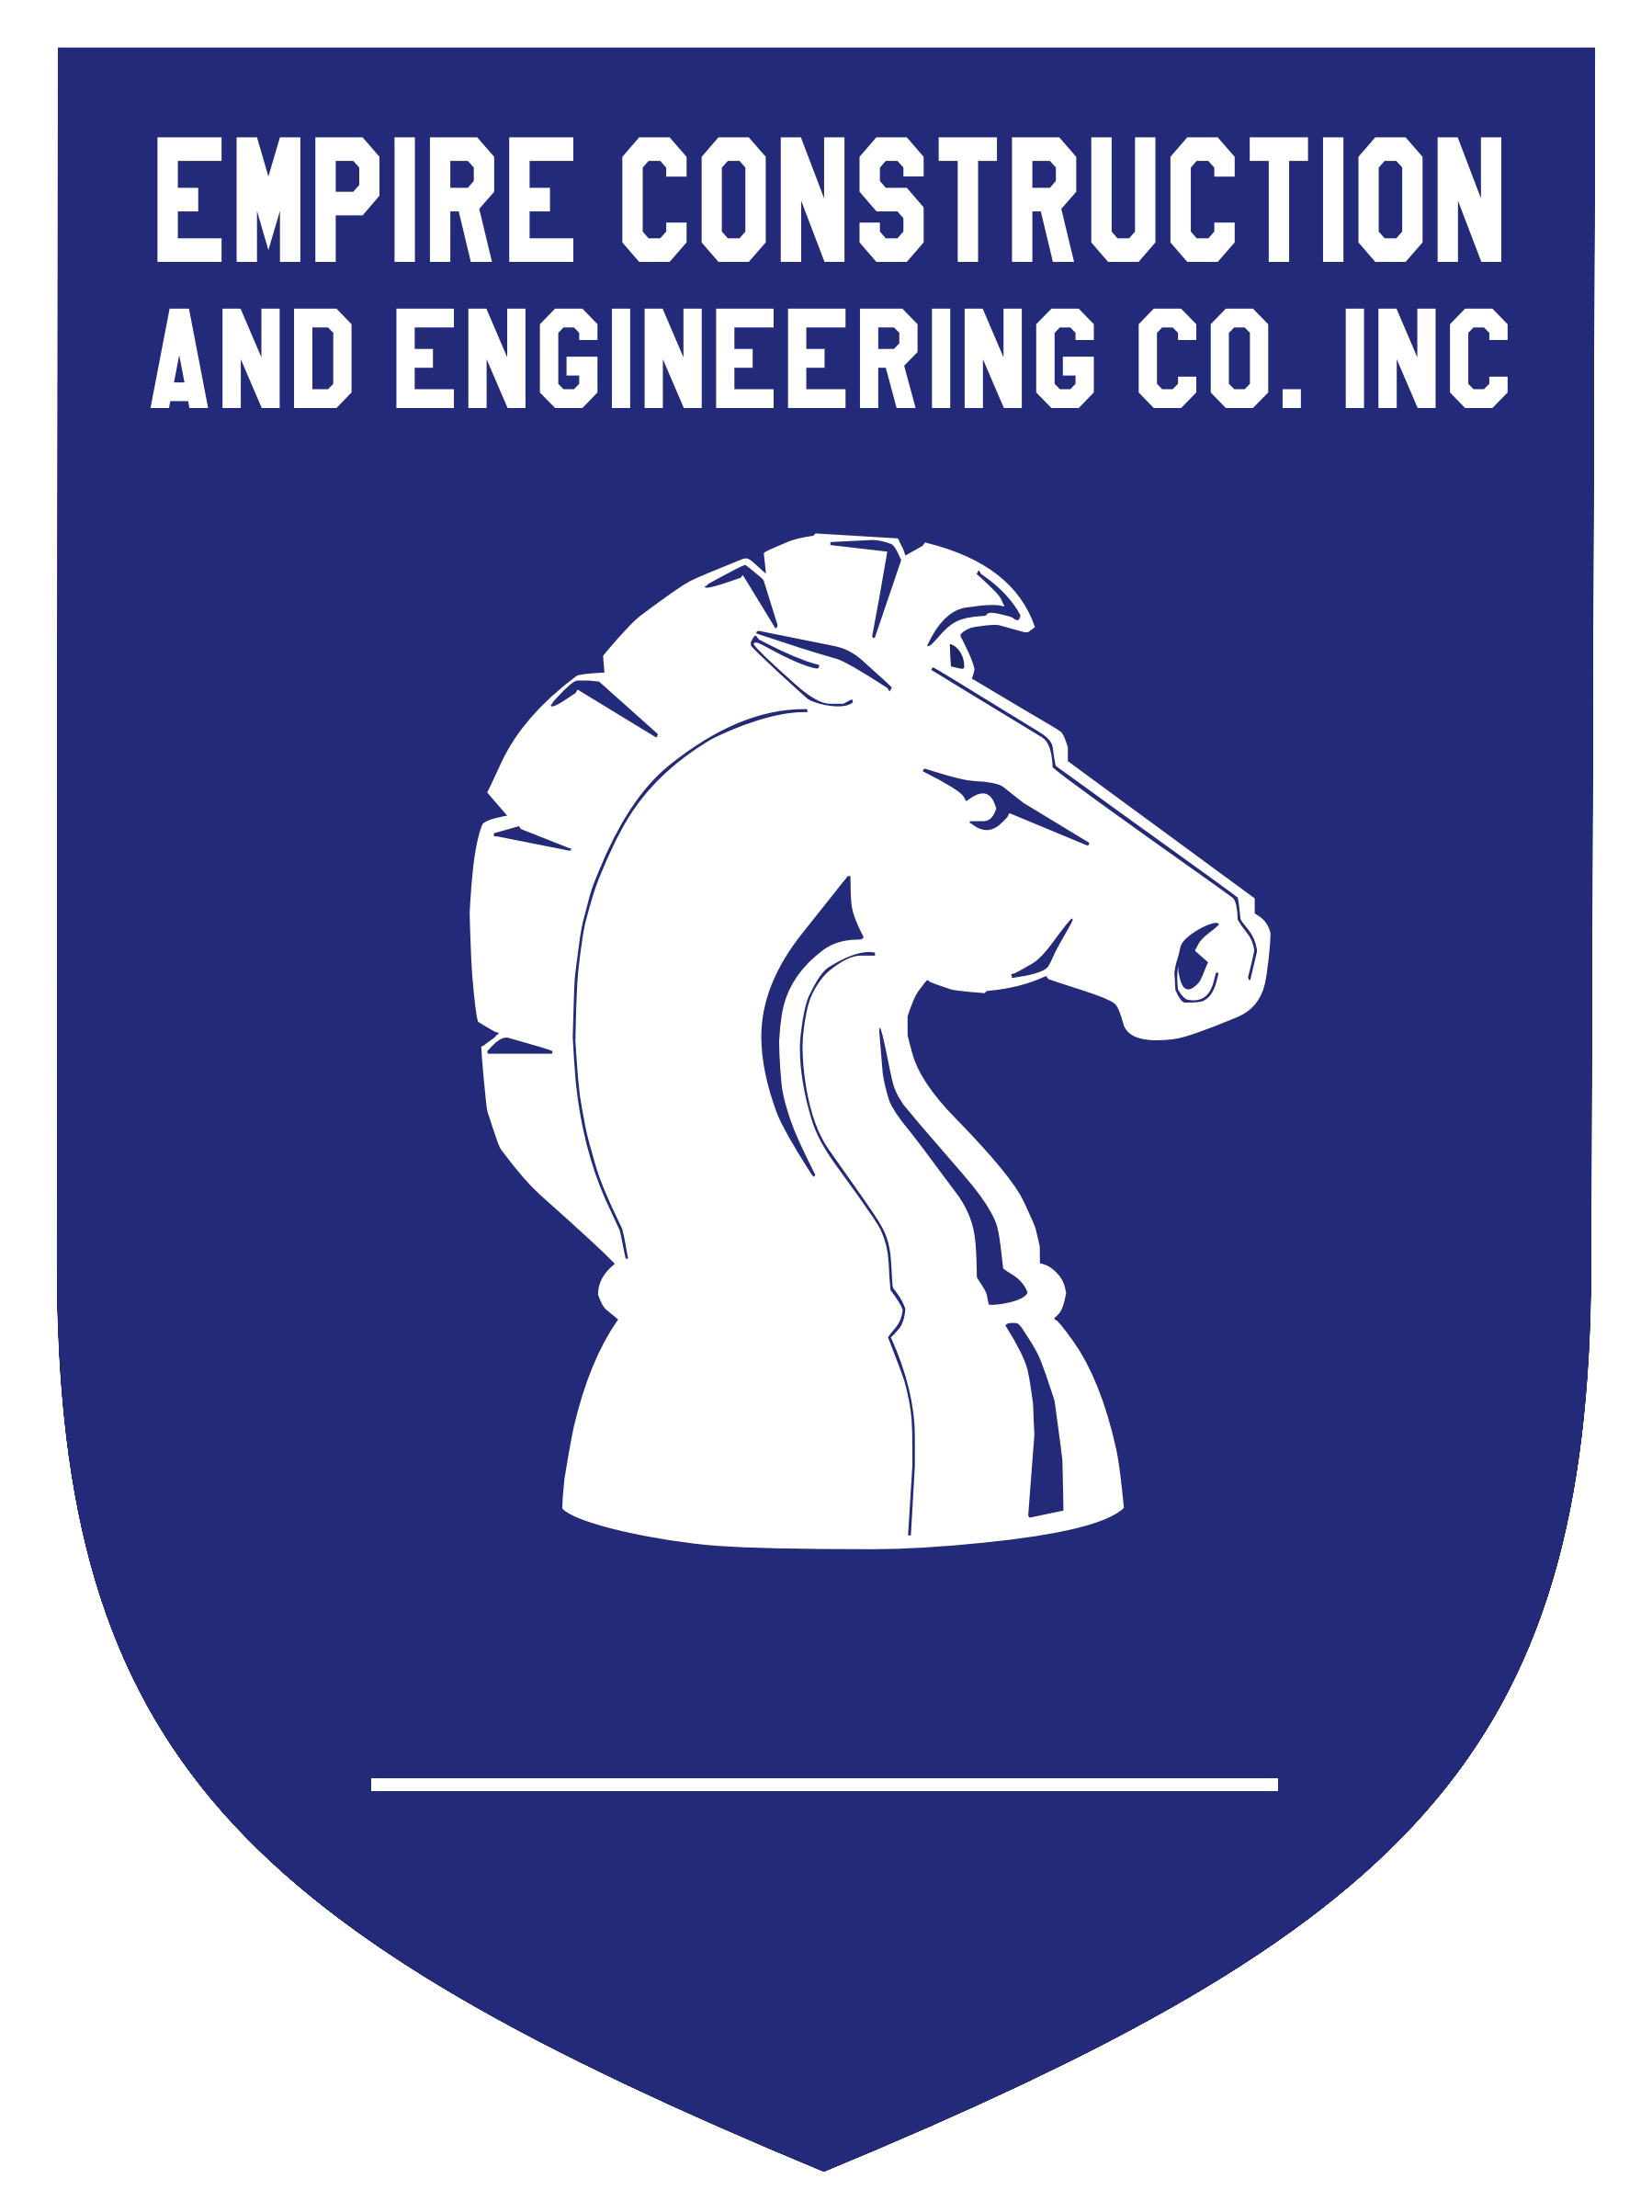 Empire Construction and Engineering Co. Inc.